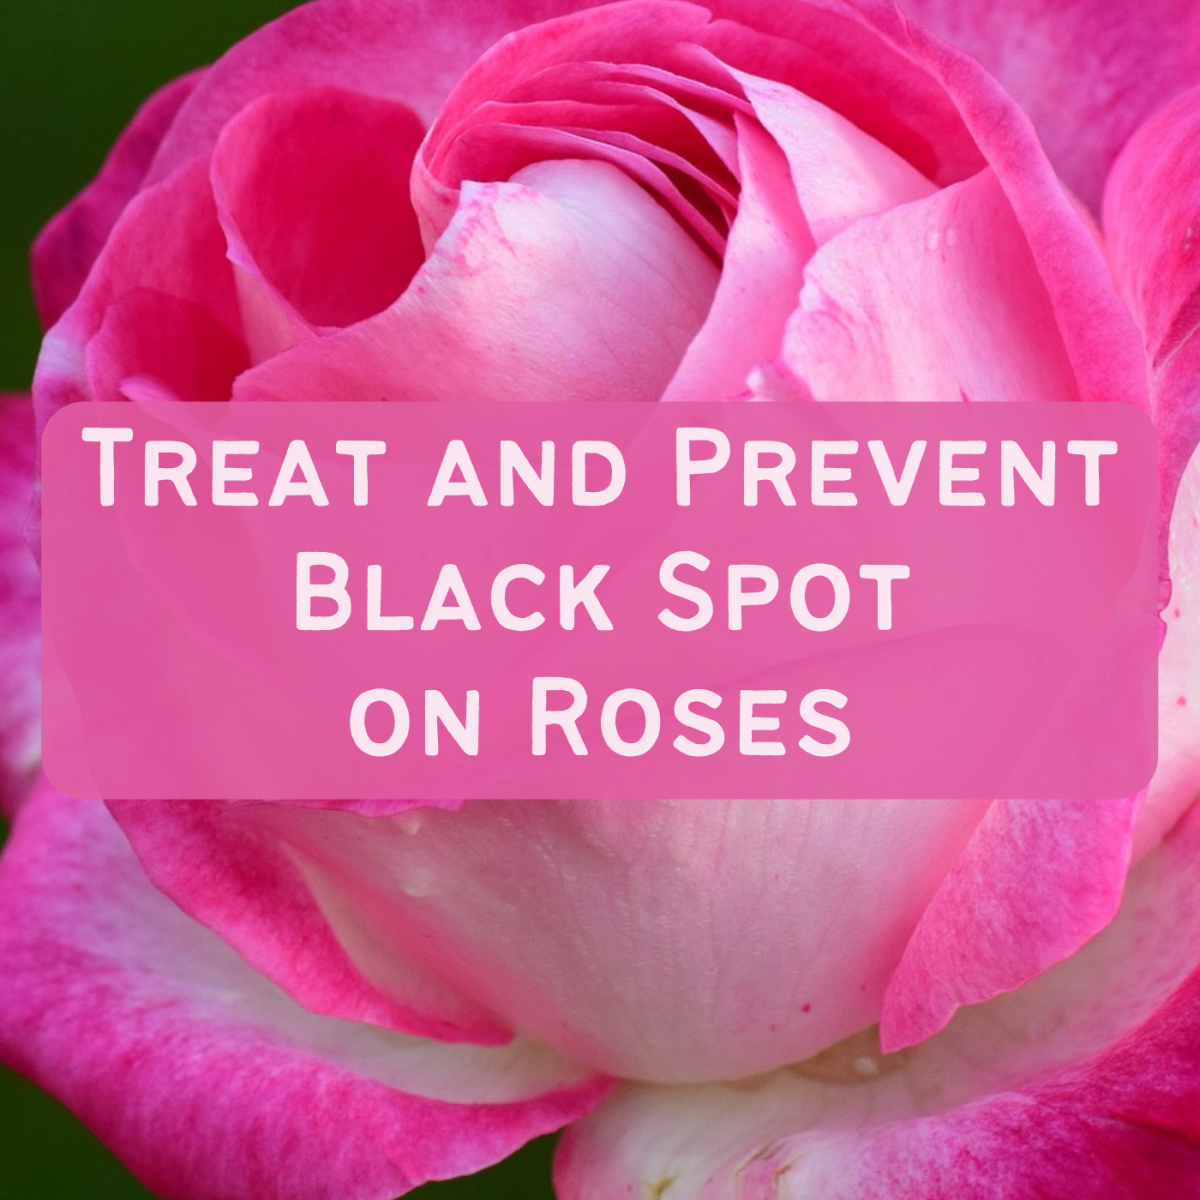 How to Treat and Prevent Black Spot Disease on Roses